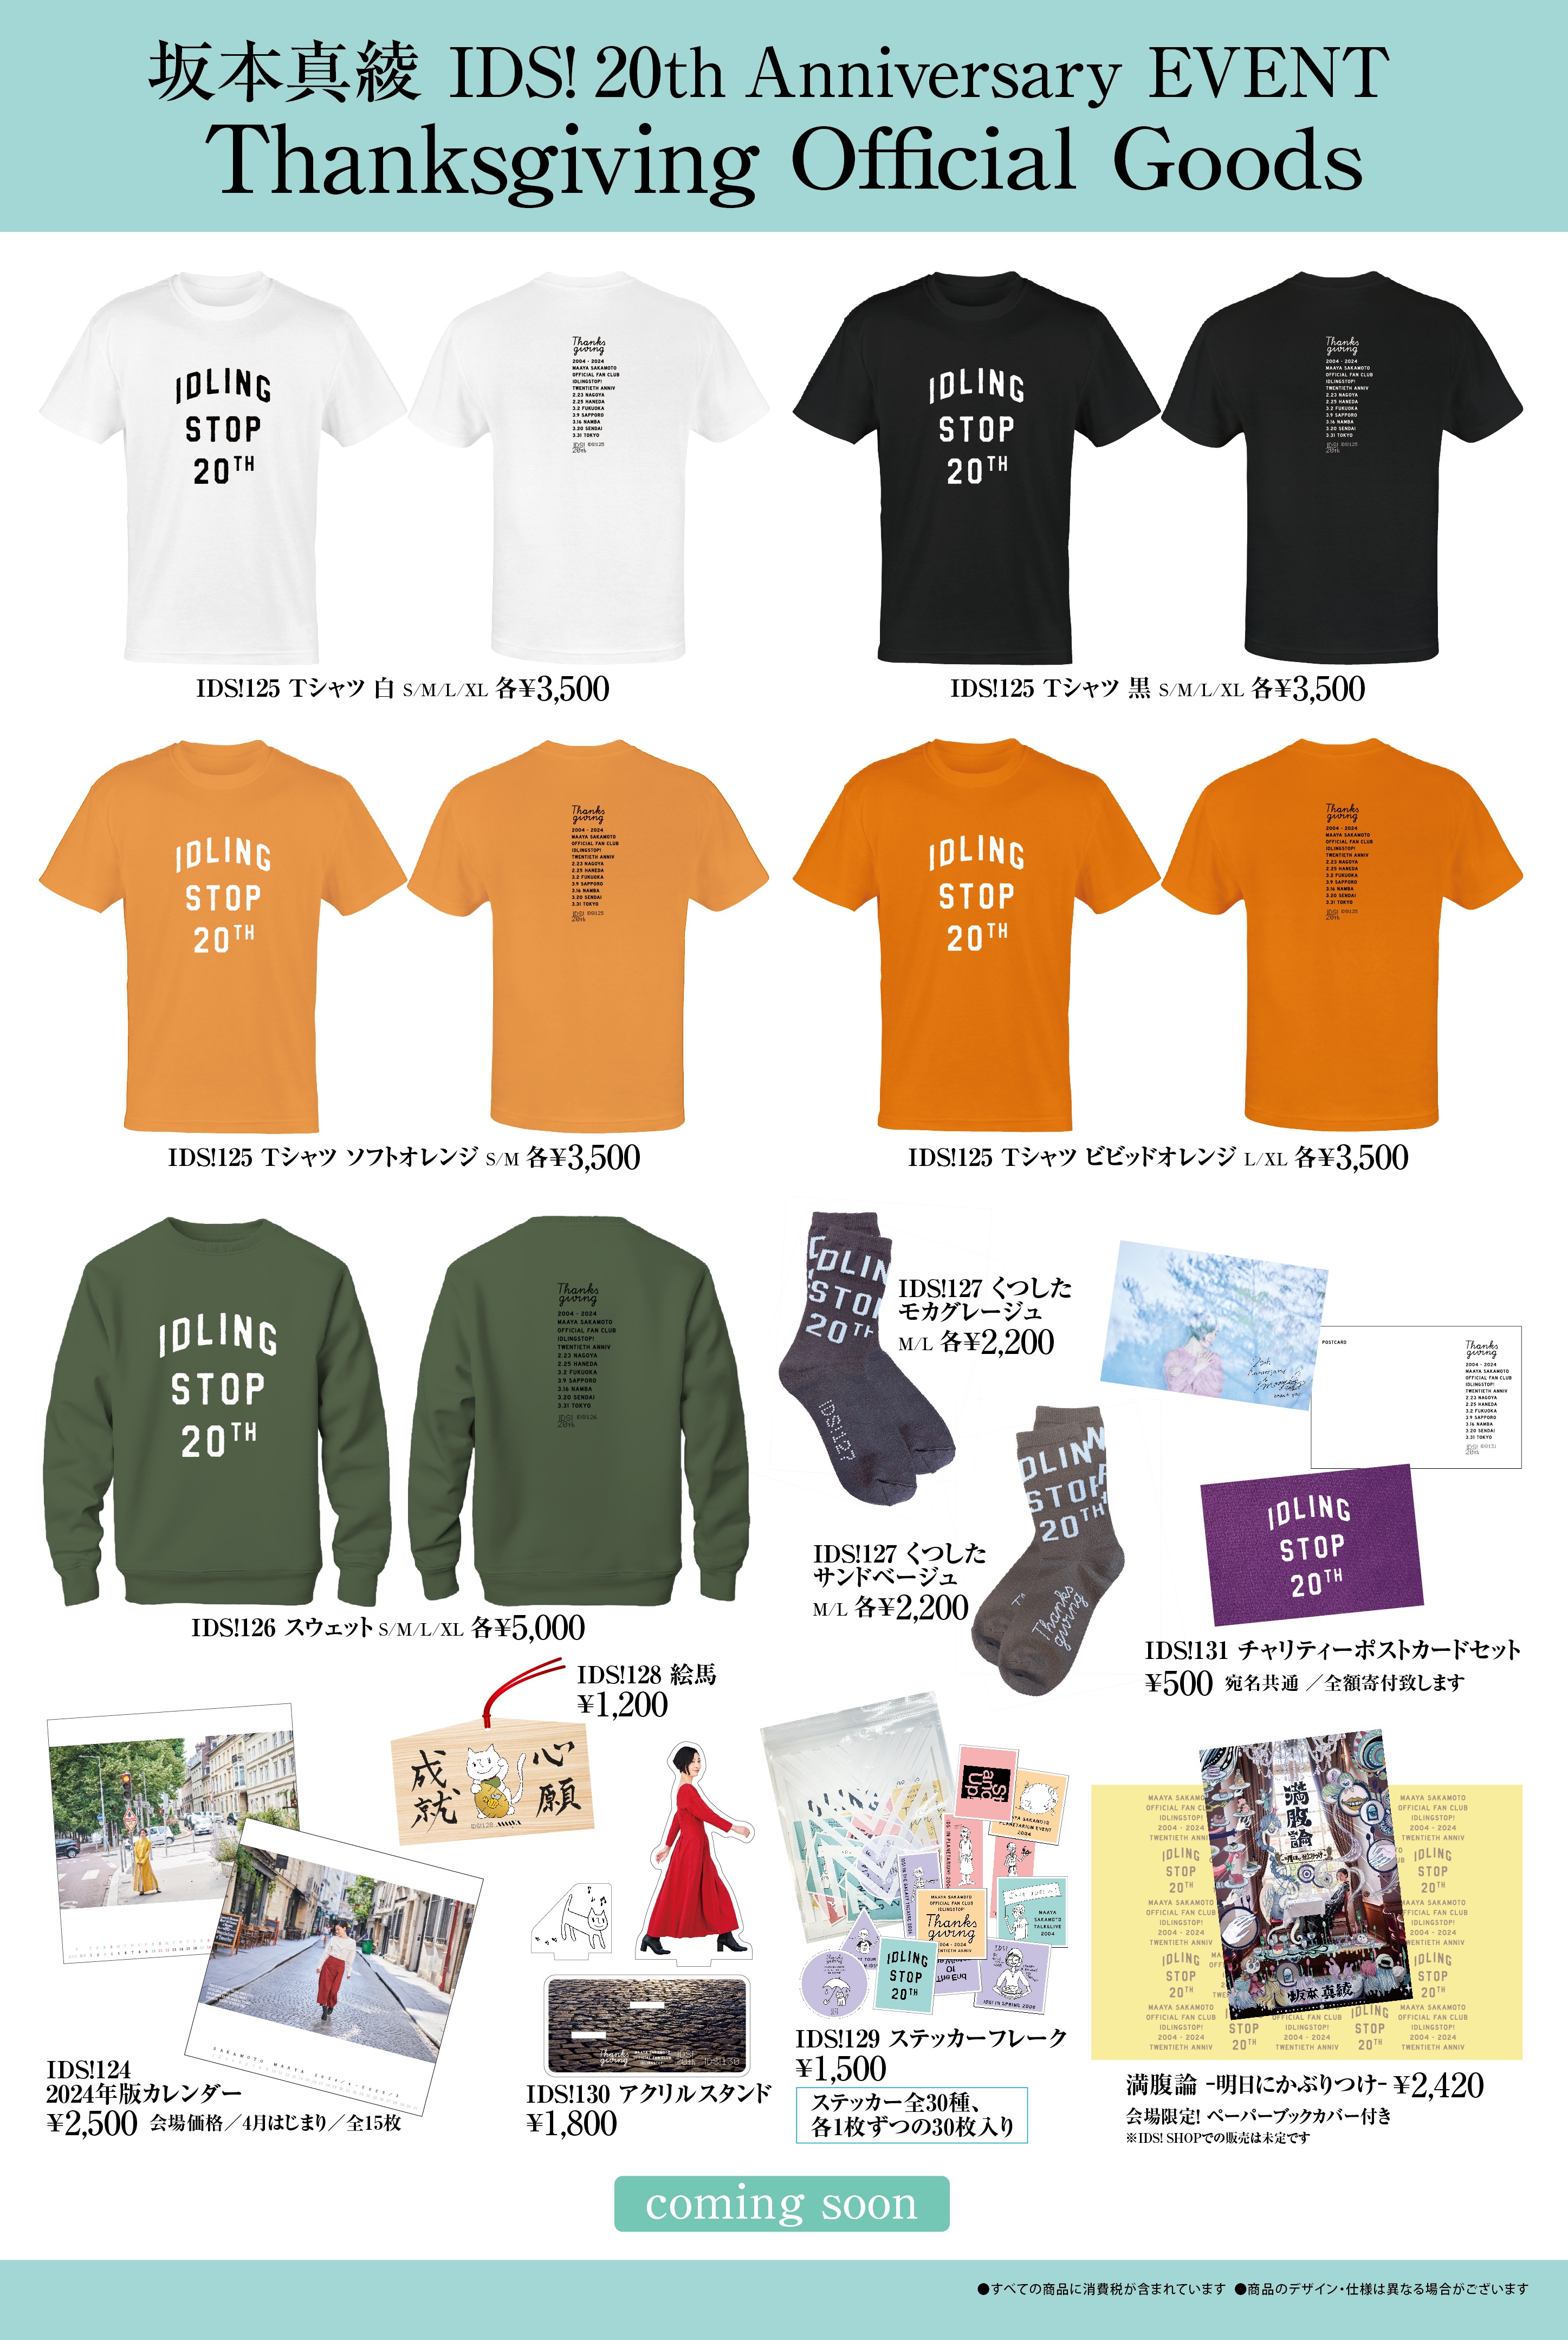 ܿ IDS!20th Anniversary EVENT Thanksgiving Official Goods